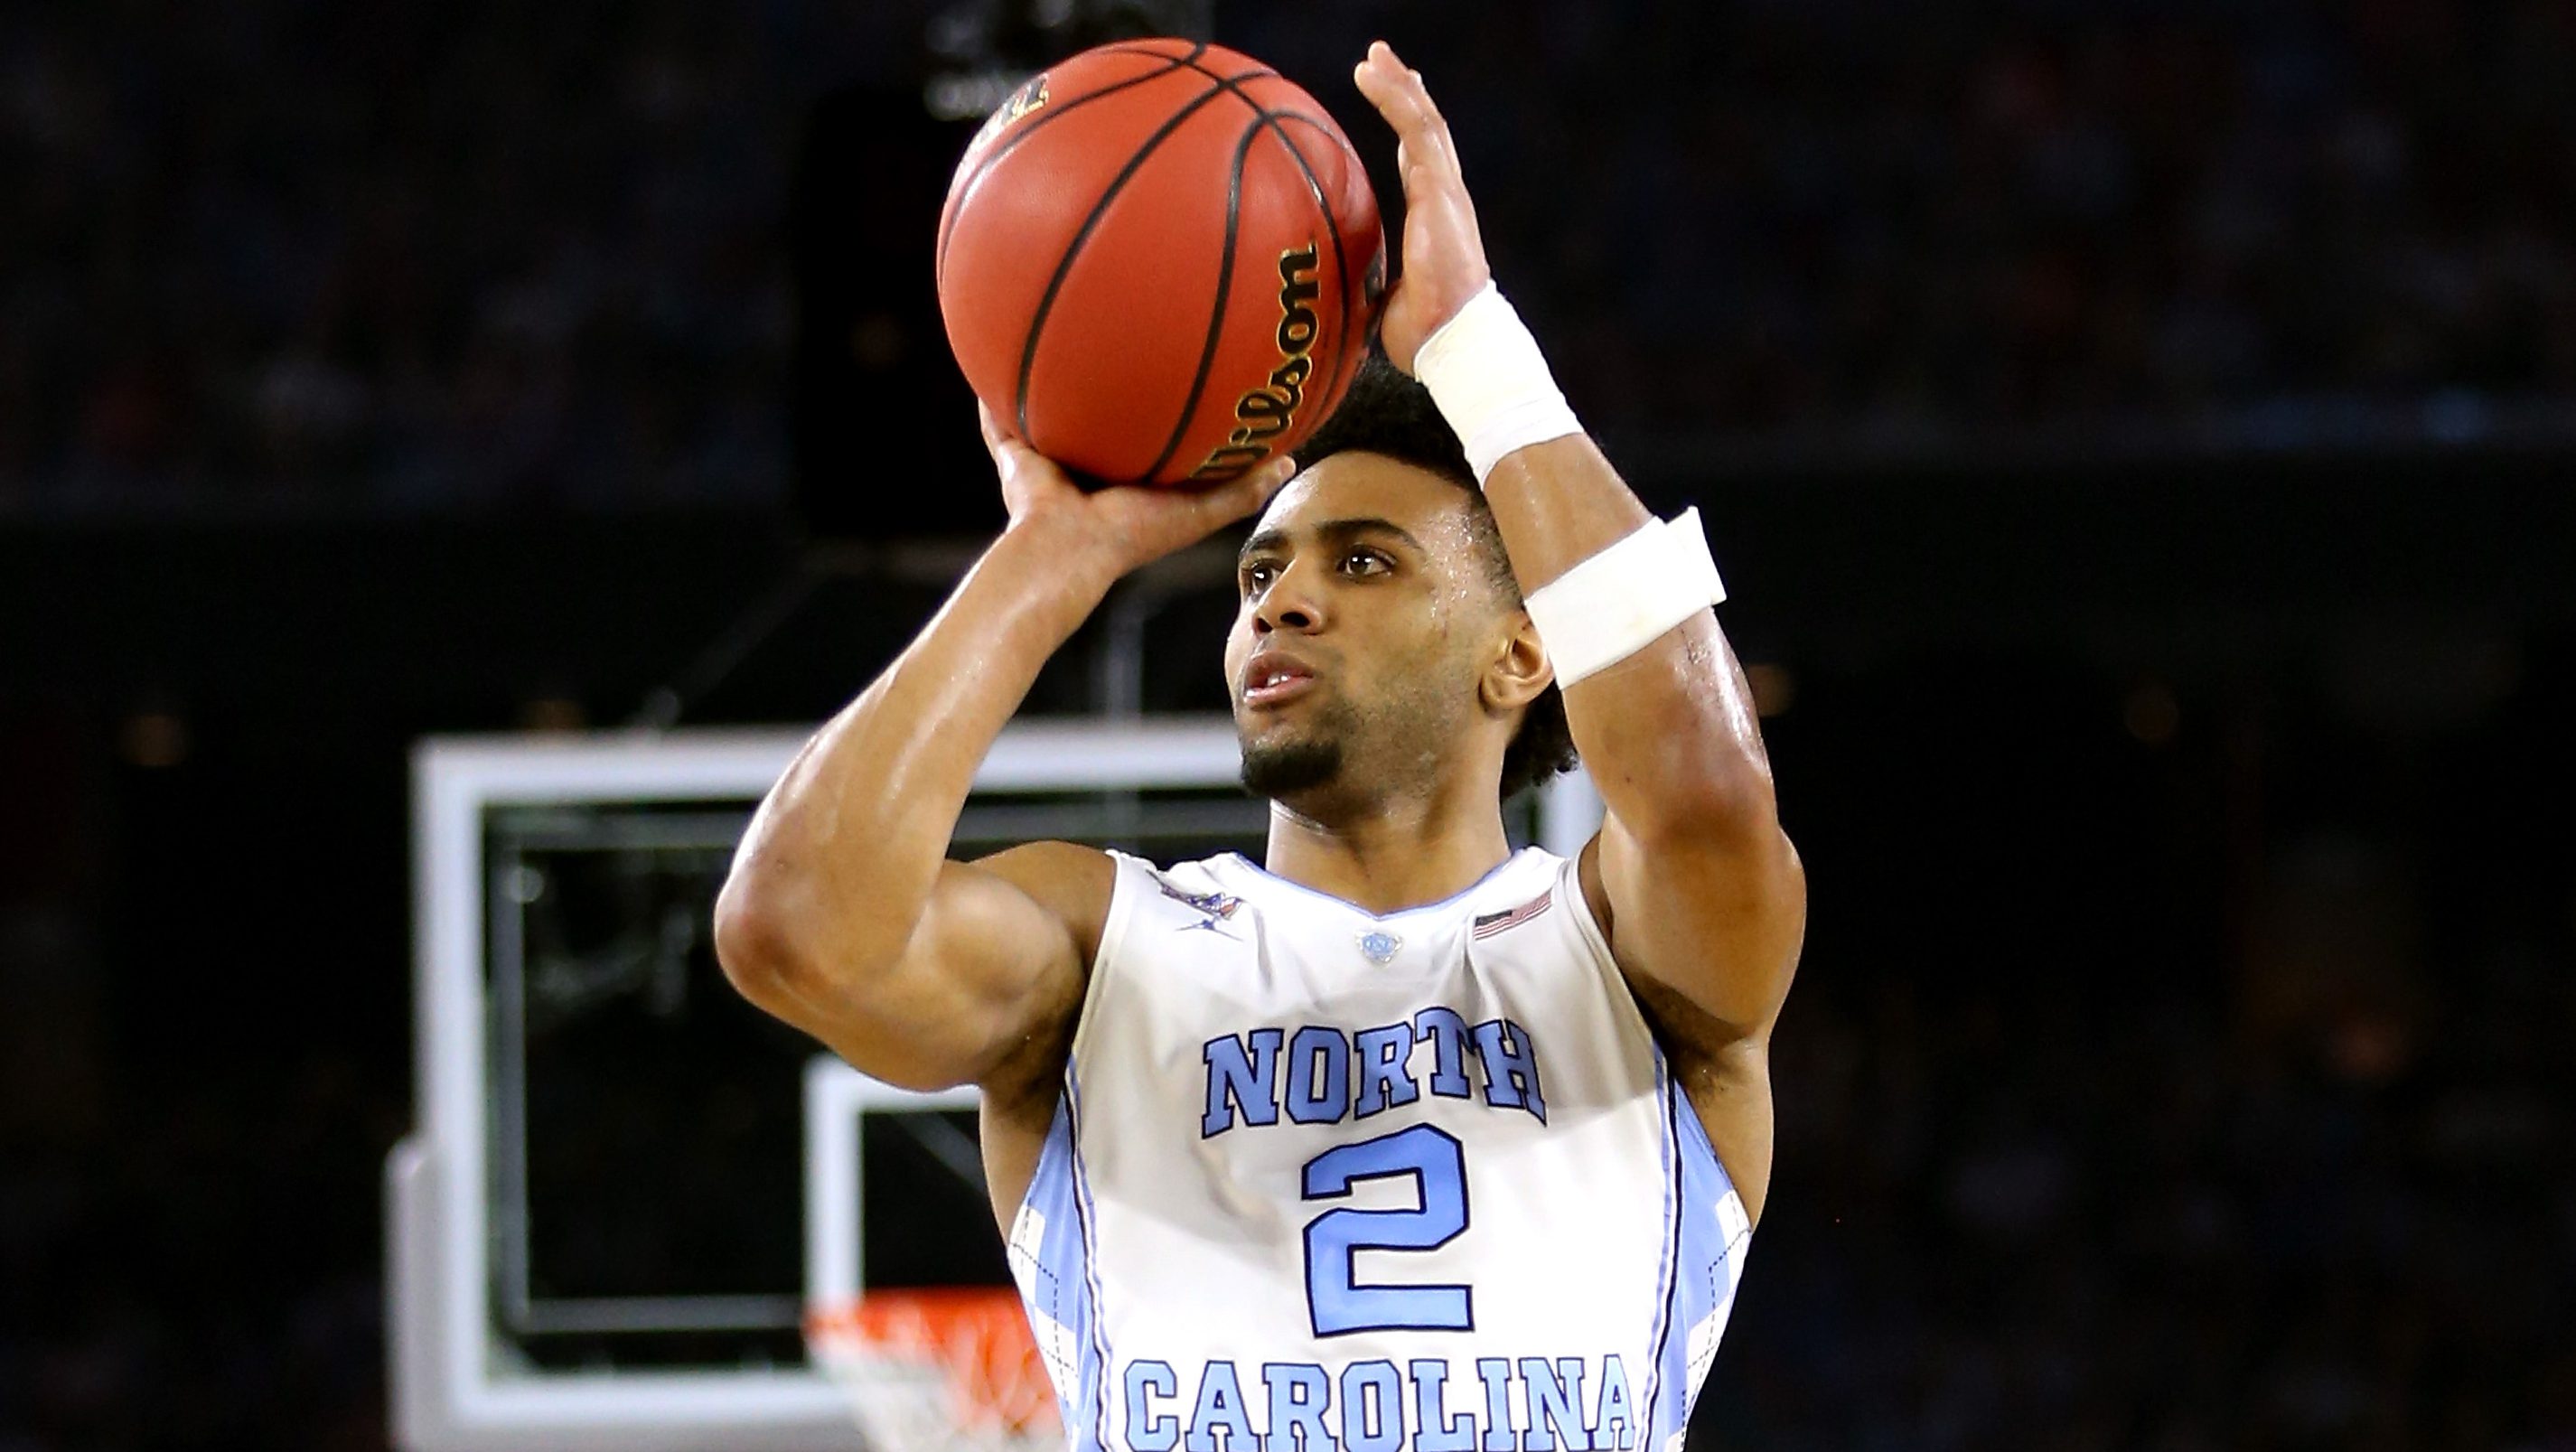 HOUSTON, TEXAS - APRIL 04: Joel Berry II #2 of the North Carolina Tar Heels shoots the ball in the first half against the Villanova Wildcats during the 2016 NCAA Men's Final Four National Championship game at NRG Stadium on April 4, 2016 in Houston, Texas. (Photo by Streeter Lecka/Getty Images)